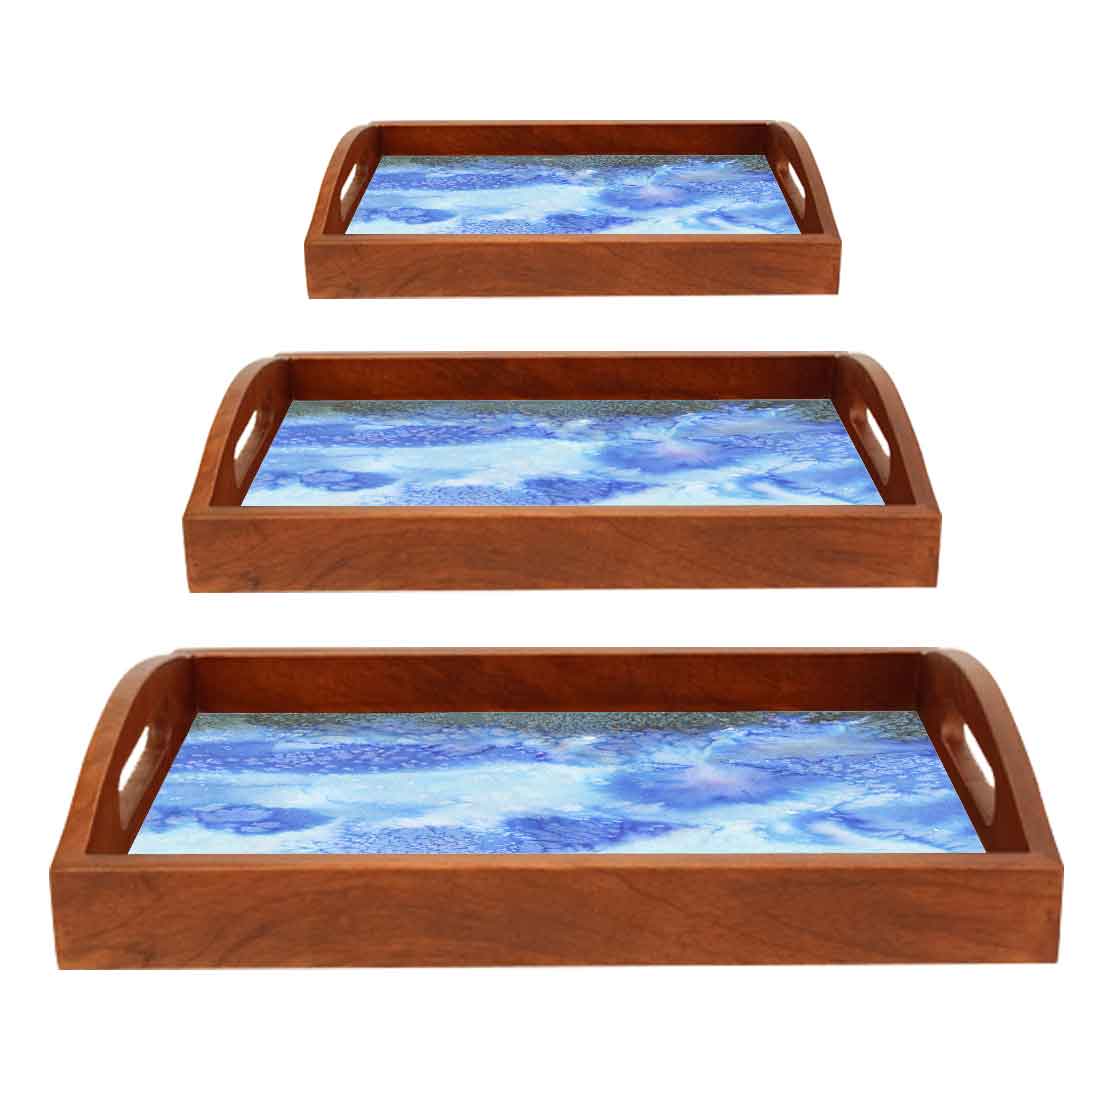 Wooden Tray with Handles Set of 3 for Tea Coffee Serving